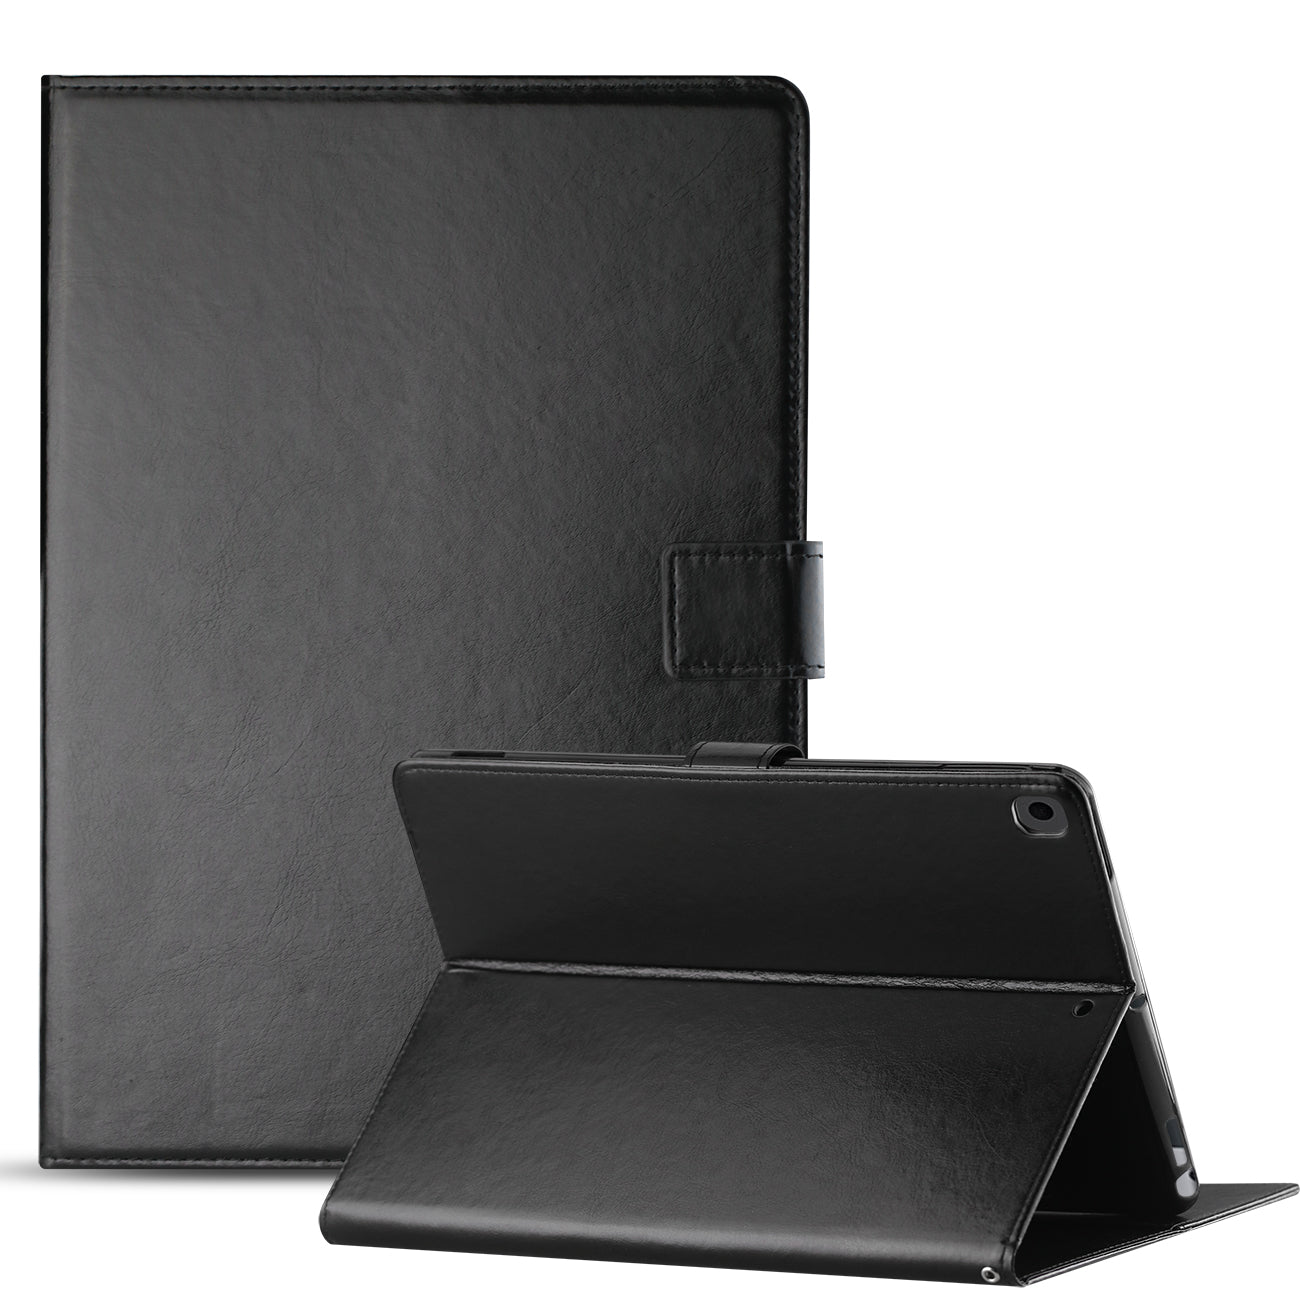 Reiko Leather Folio Cover Protective Case for 10.2" iPad 8 2020 or iPad 7 2019 In Back